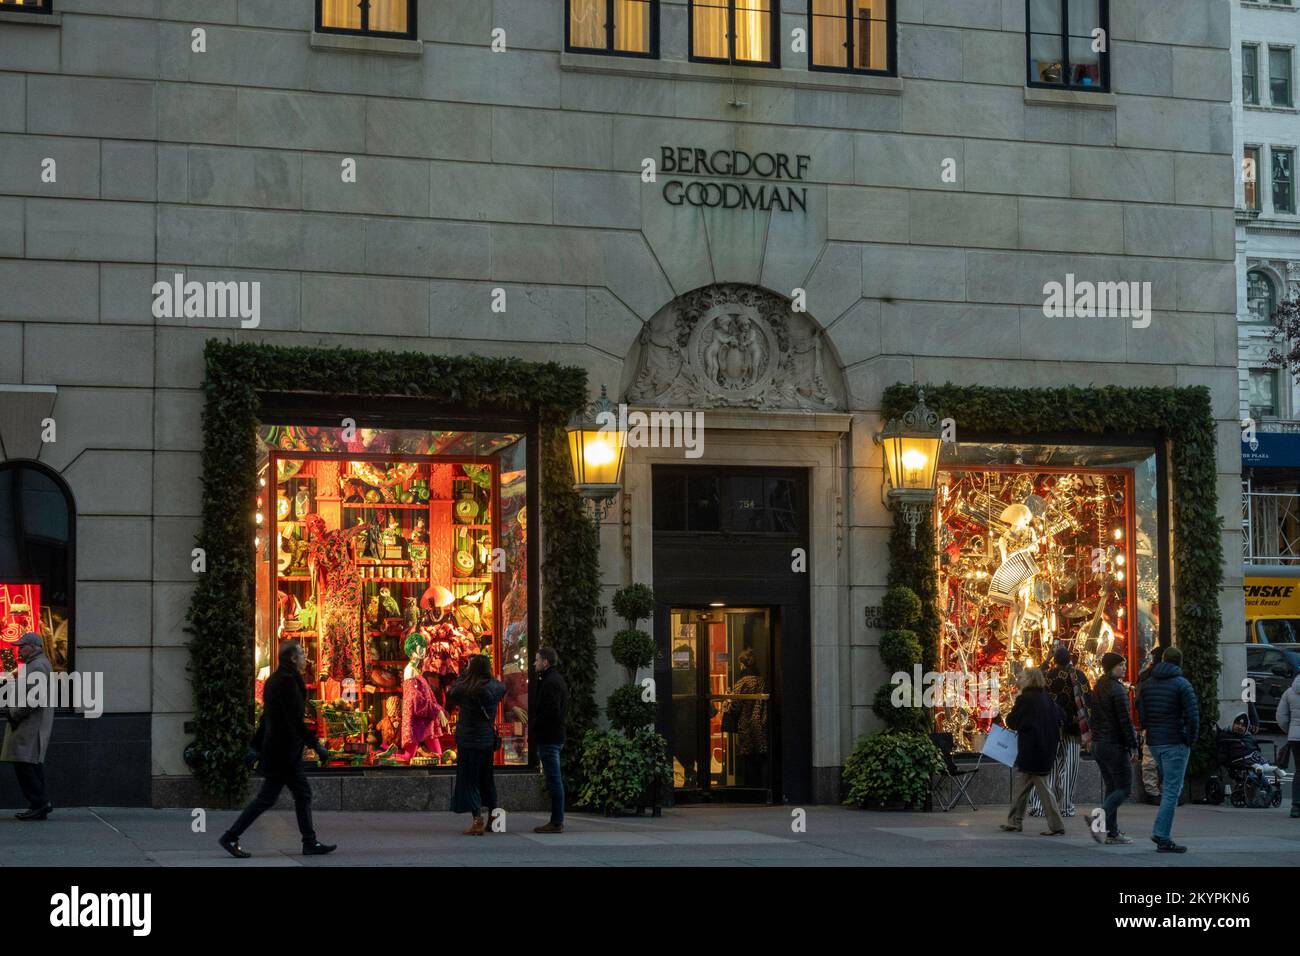 Bergdorf Goodman in New York Editorial Photo - Image of ornaments